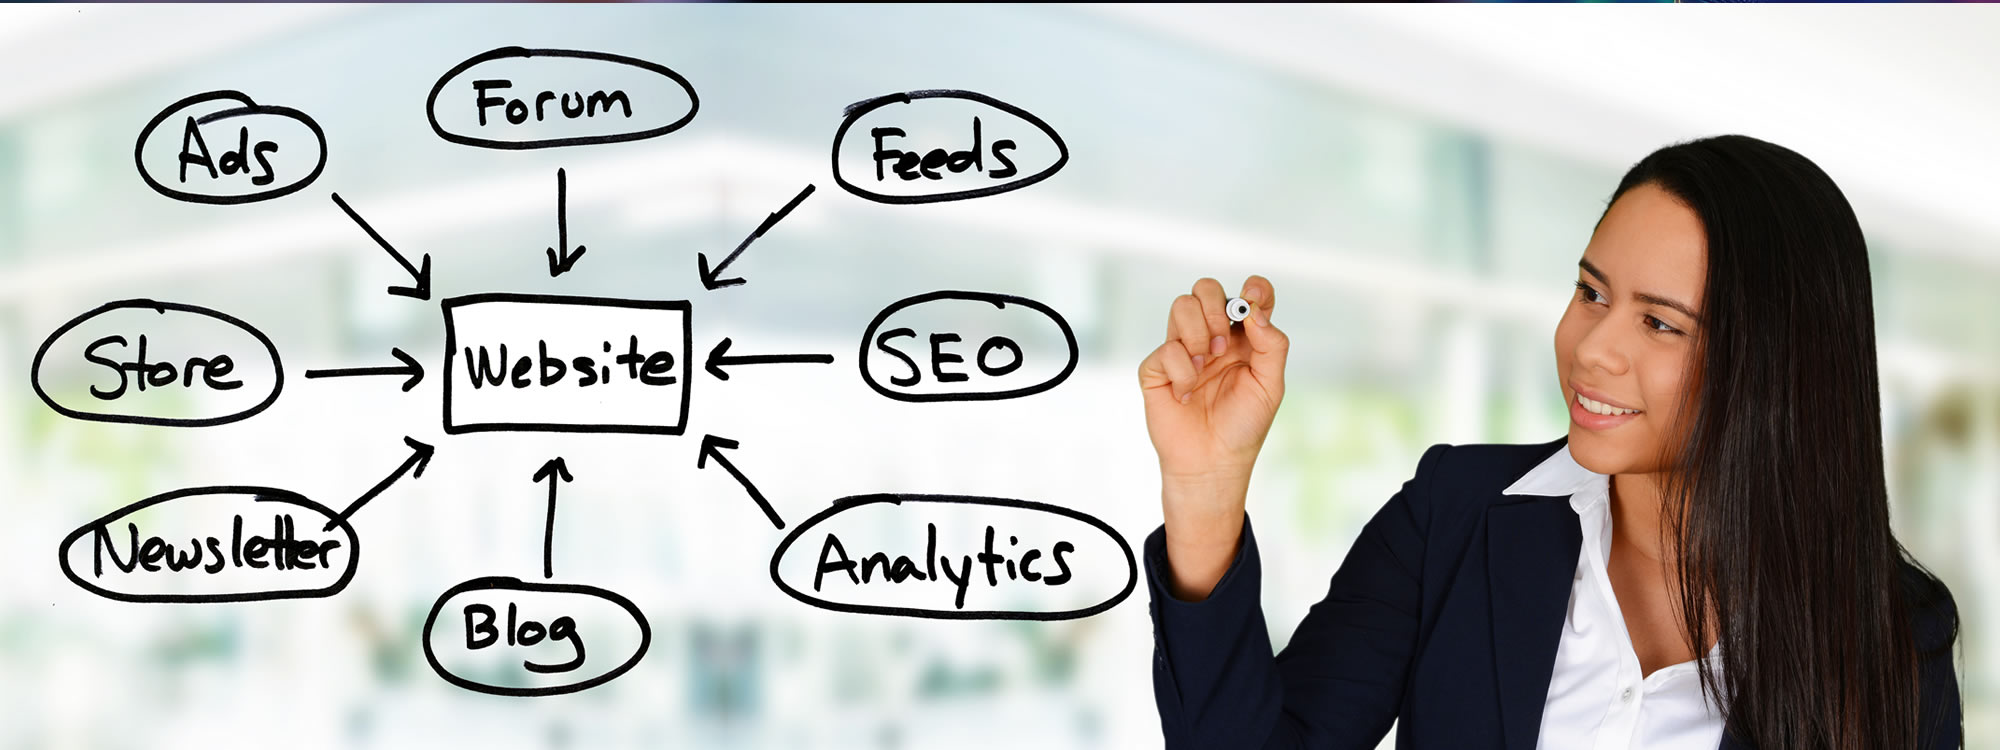 Aspects of SEM and SEO work together for best results